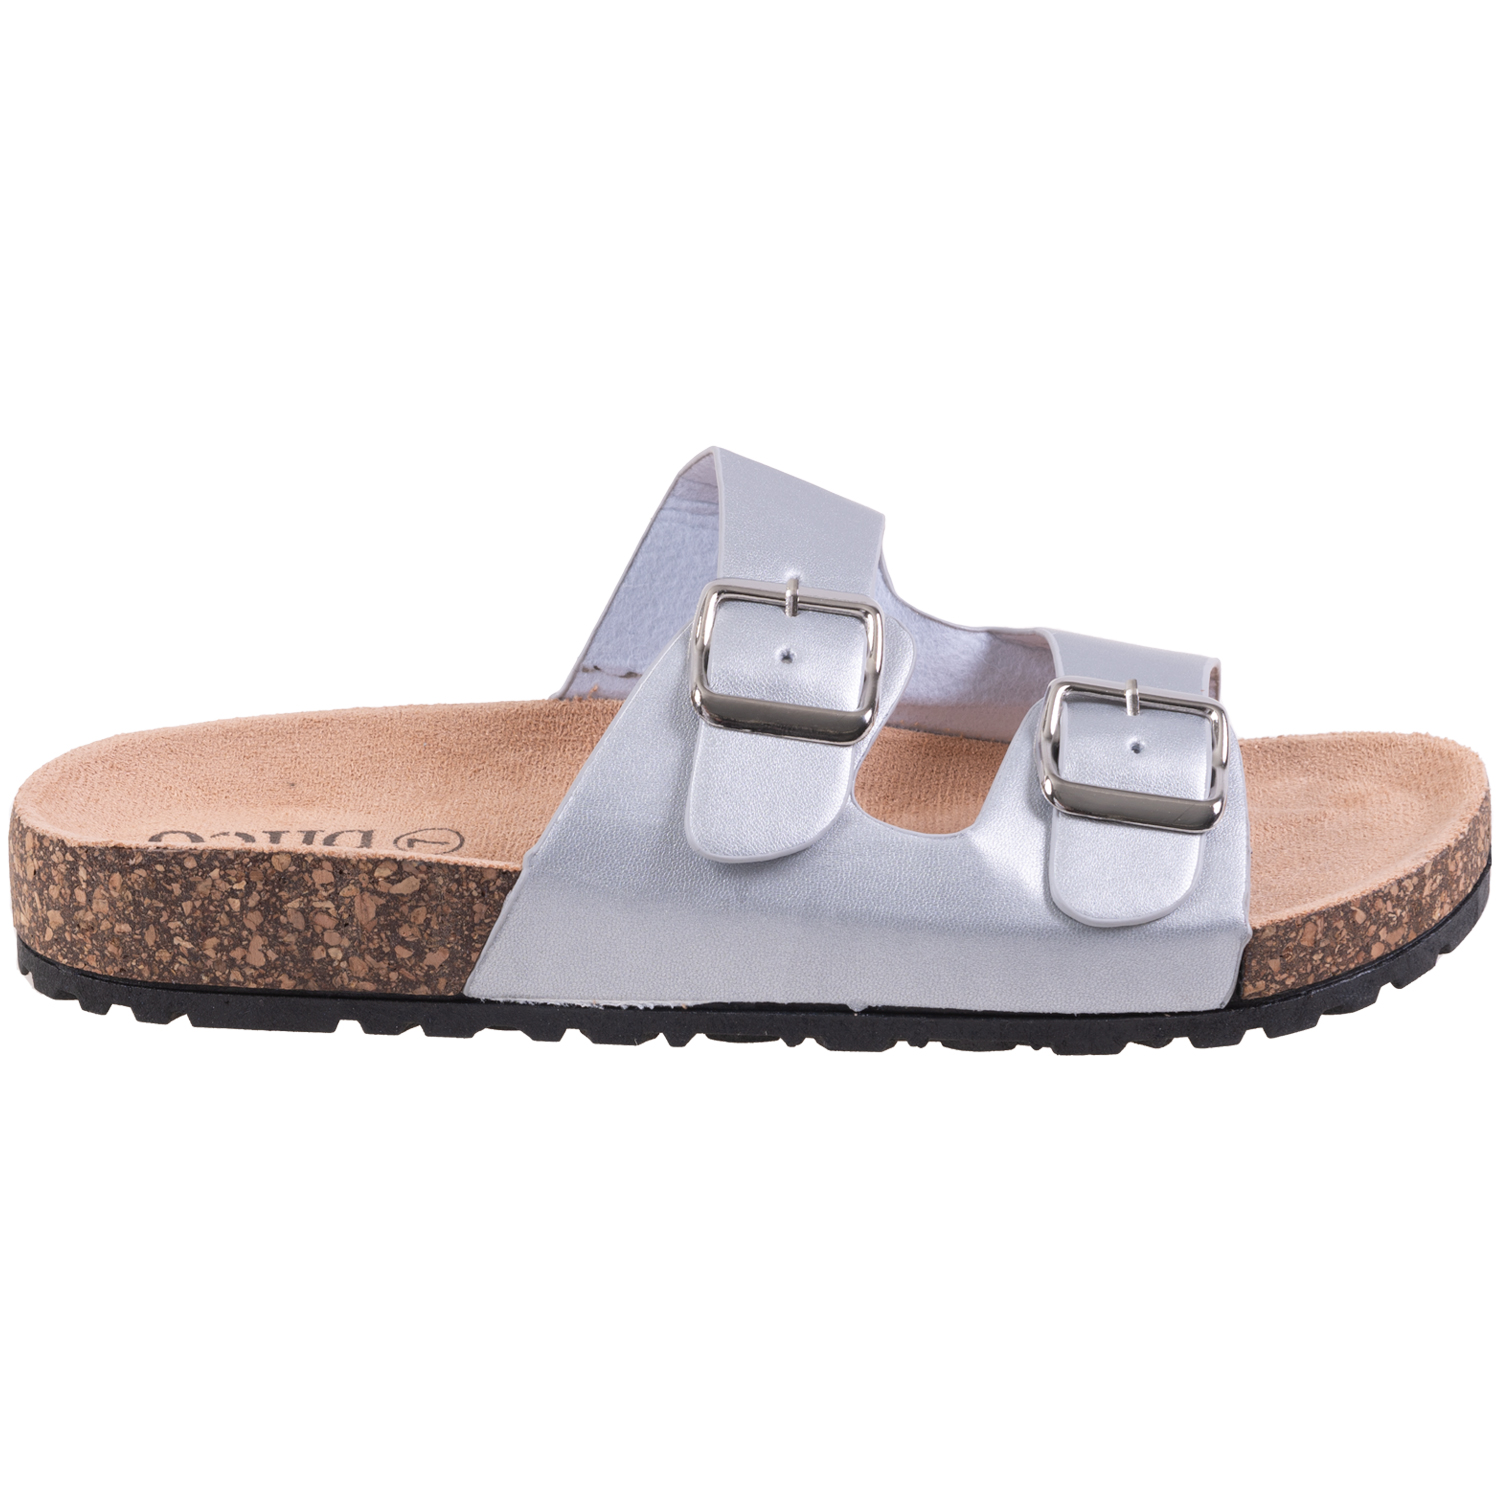 Cork sandals with 2-strap buckle - Silver, size 6